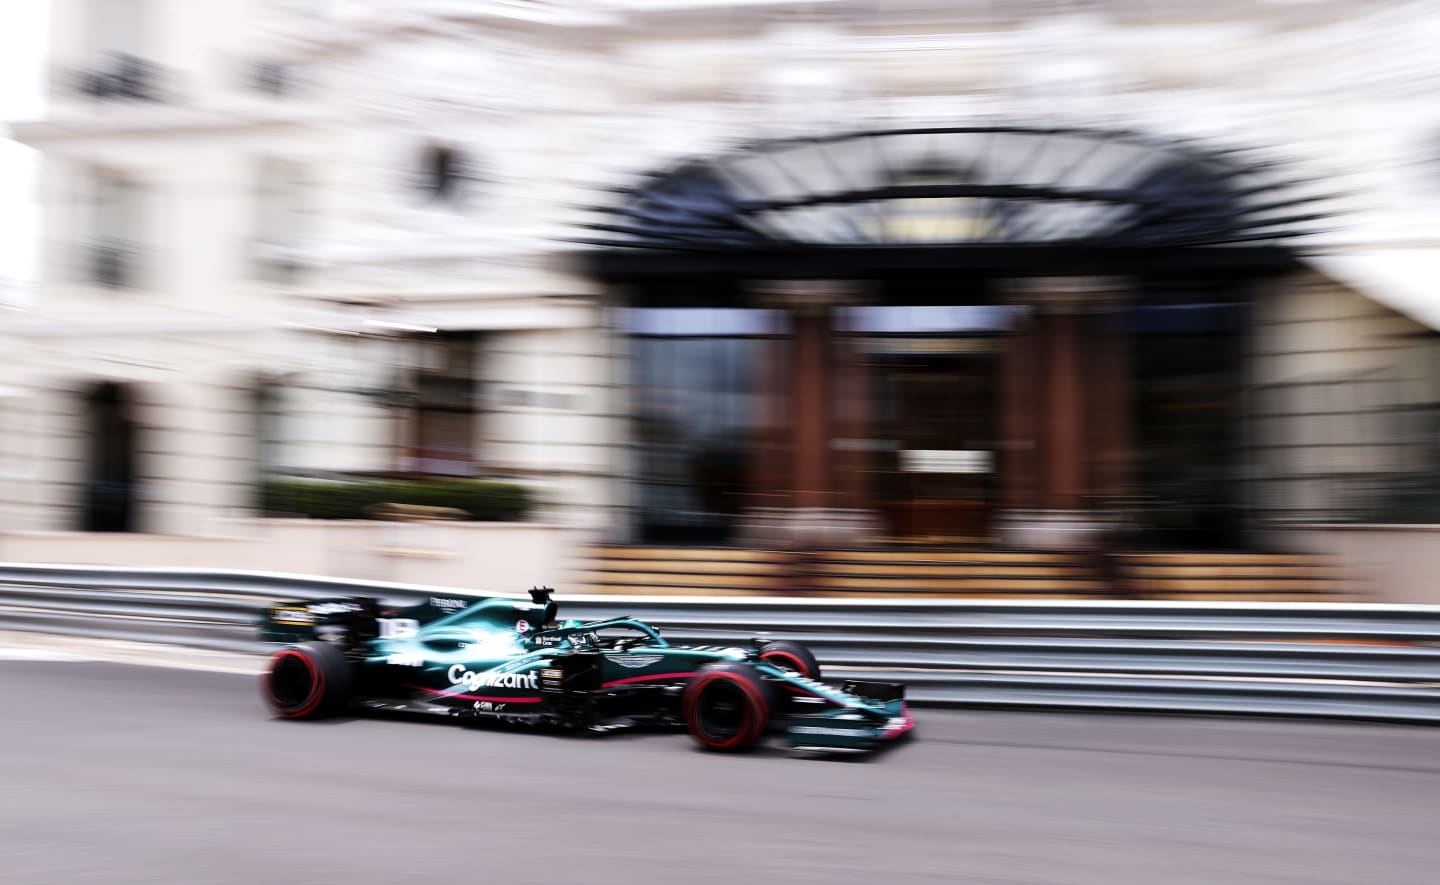 MONTE-CARLO, MONACO - MAY 22: Lance Stroll of Canada driving the (18) Aston Martin AMR21 Mercedes on track during final practice prior to the F1 Grand Prix of Monaco at Circuit de Monaco on May 22, 2021 in Monte-Carlo, Monaco. (Photo by Lars Baron/Getty Images)